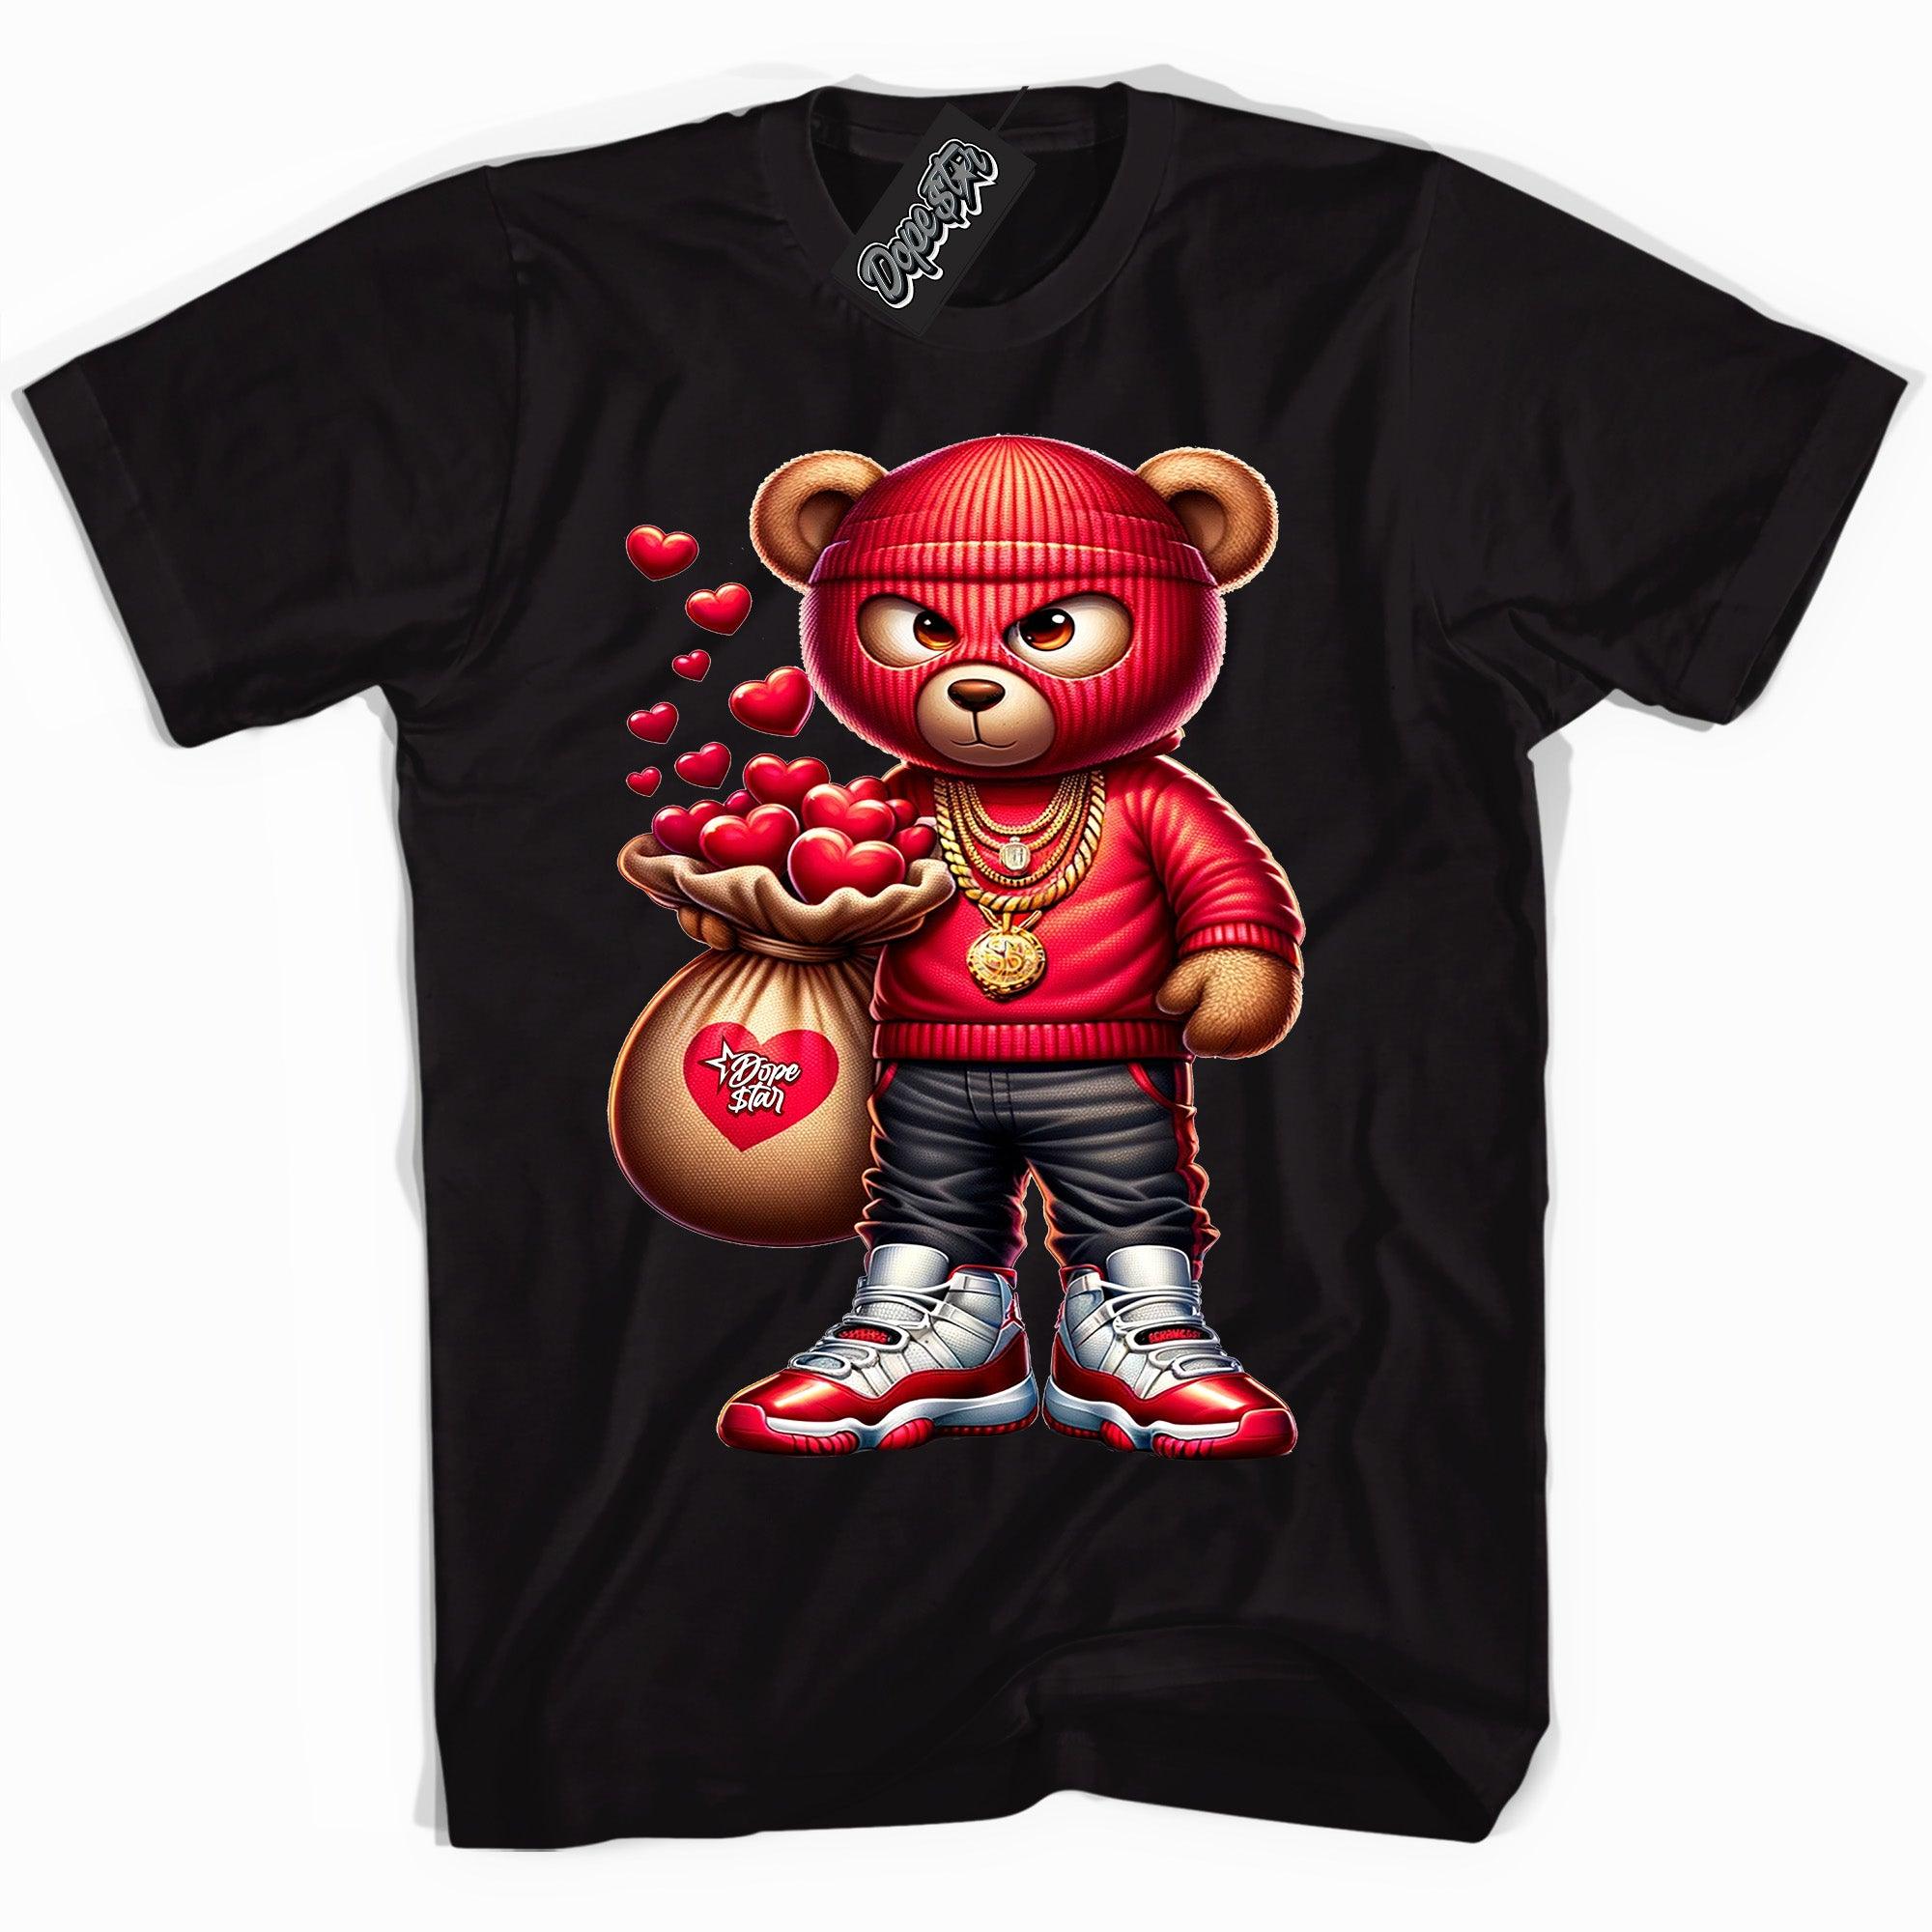 Cool Black graphic tee with “ Valentine Thief ” print, that perfectly matches Air Jordan 11 Cherry sneakers 